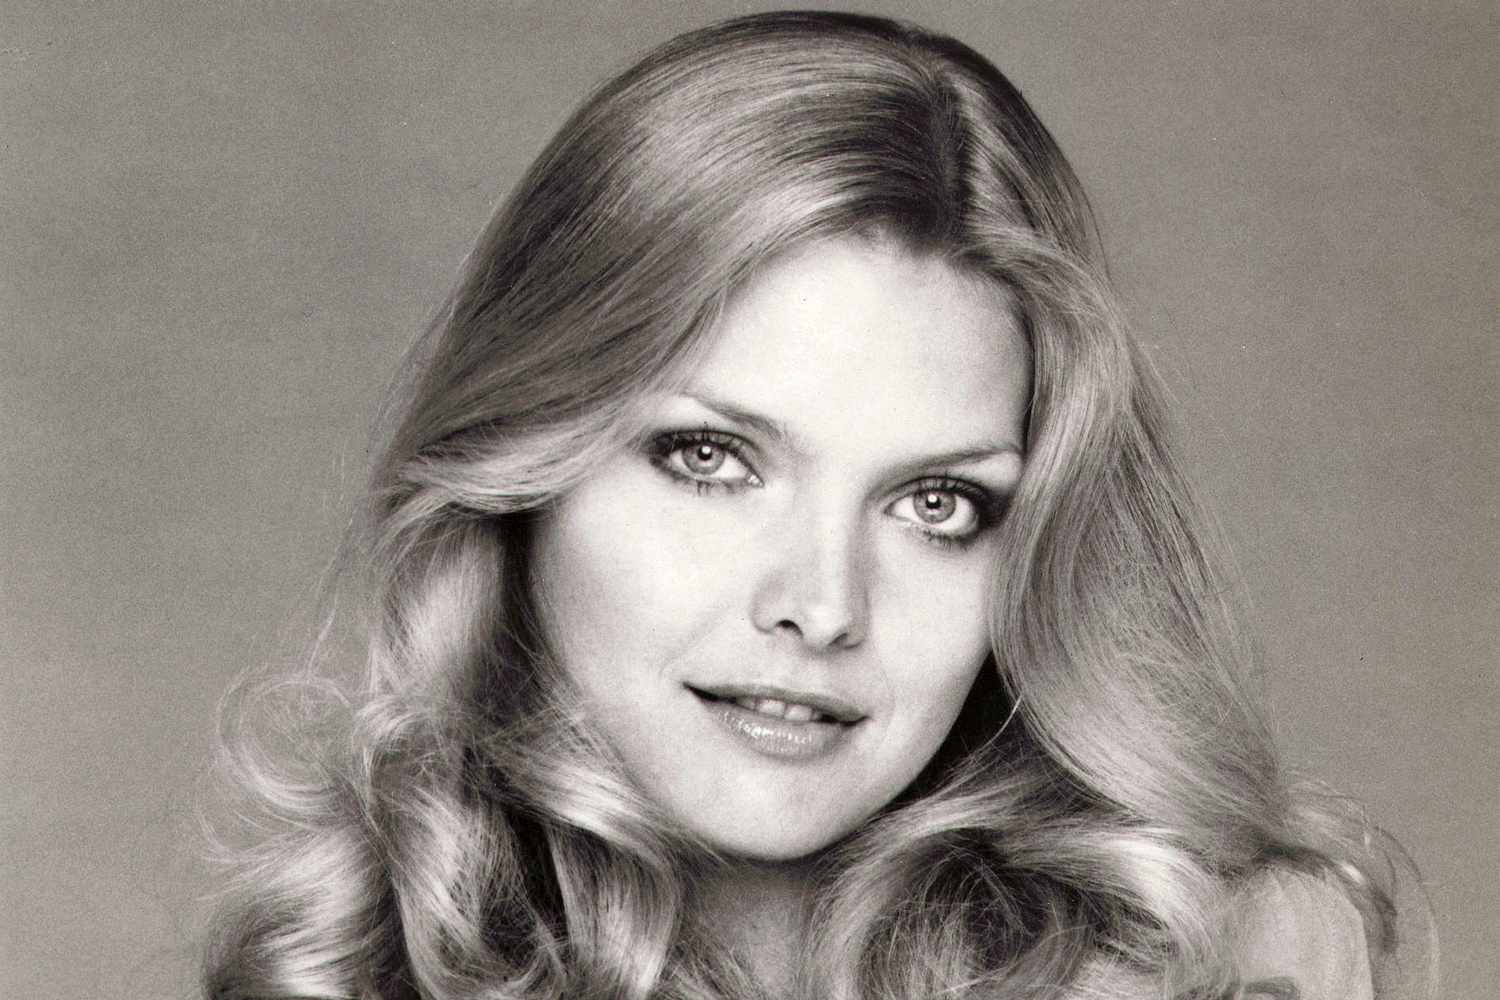 15 Gorgeous Michelle Pfeiffer Photos That Prove She's a Timeless Beauty